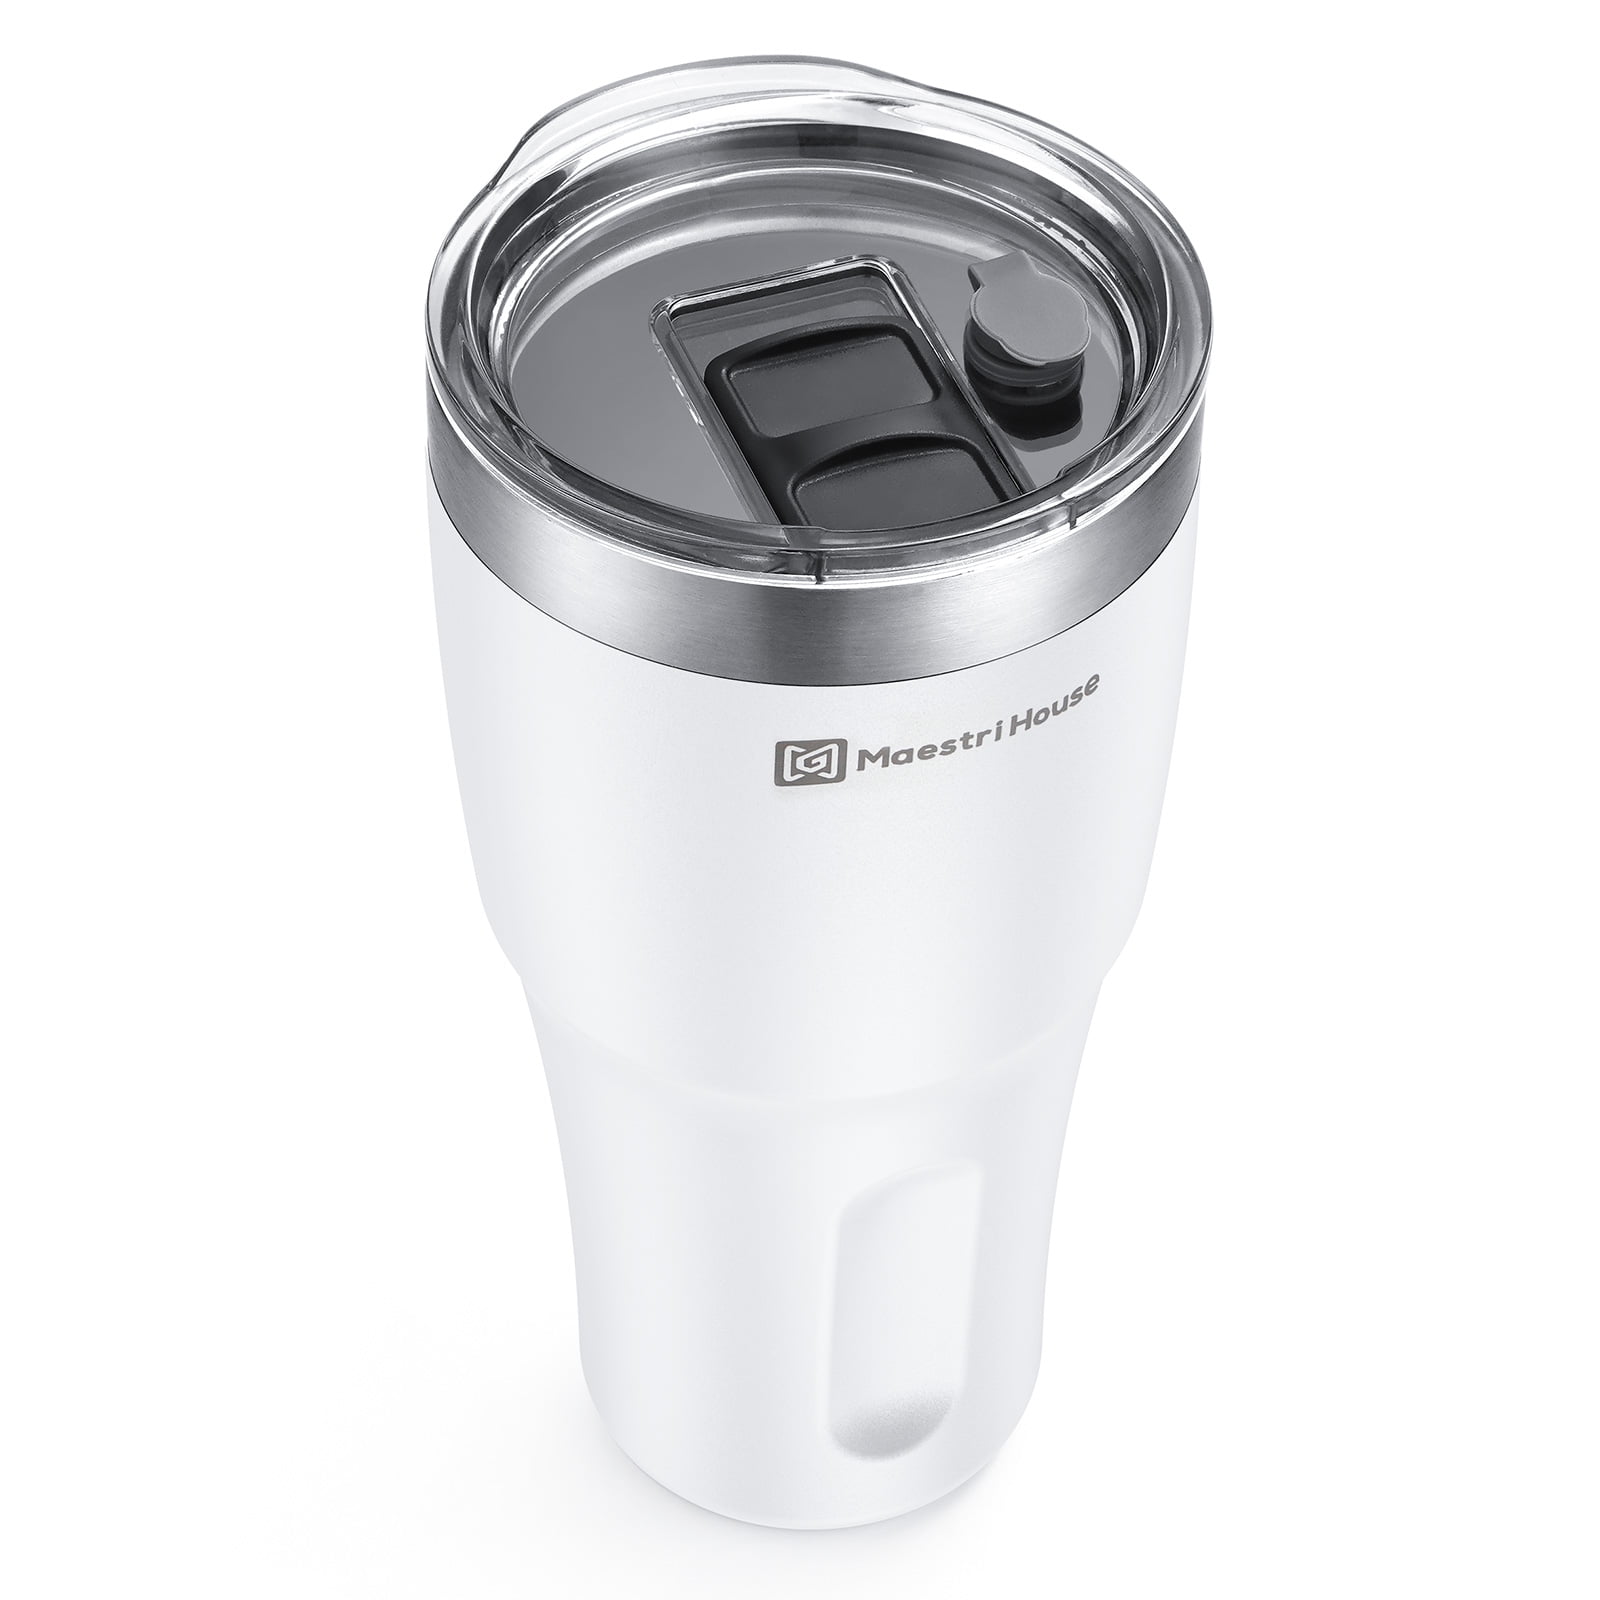 Ptlom 510ML Stainless Steel Car Coffee Cup Leakproof Insulated Thermal  Thermos Cup Car Portable Travel Coffee Mug,White 